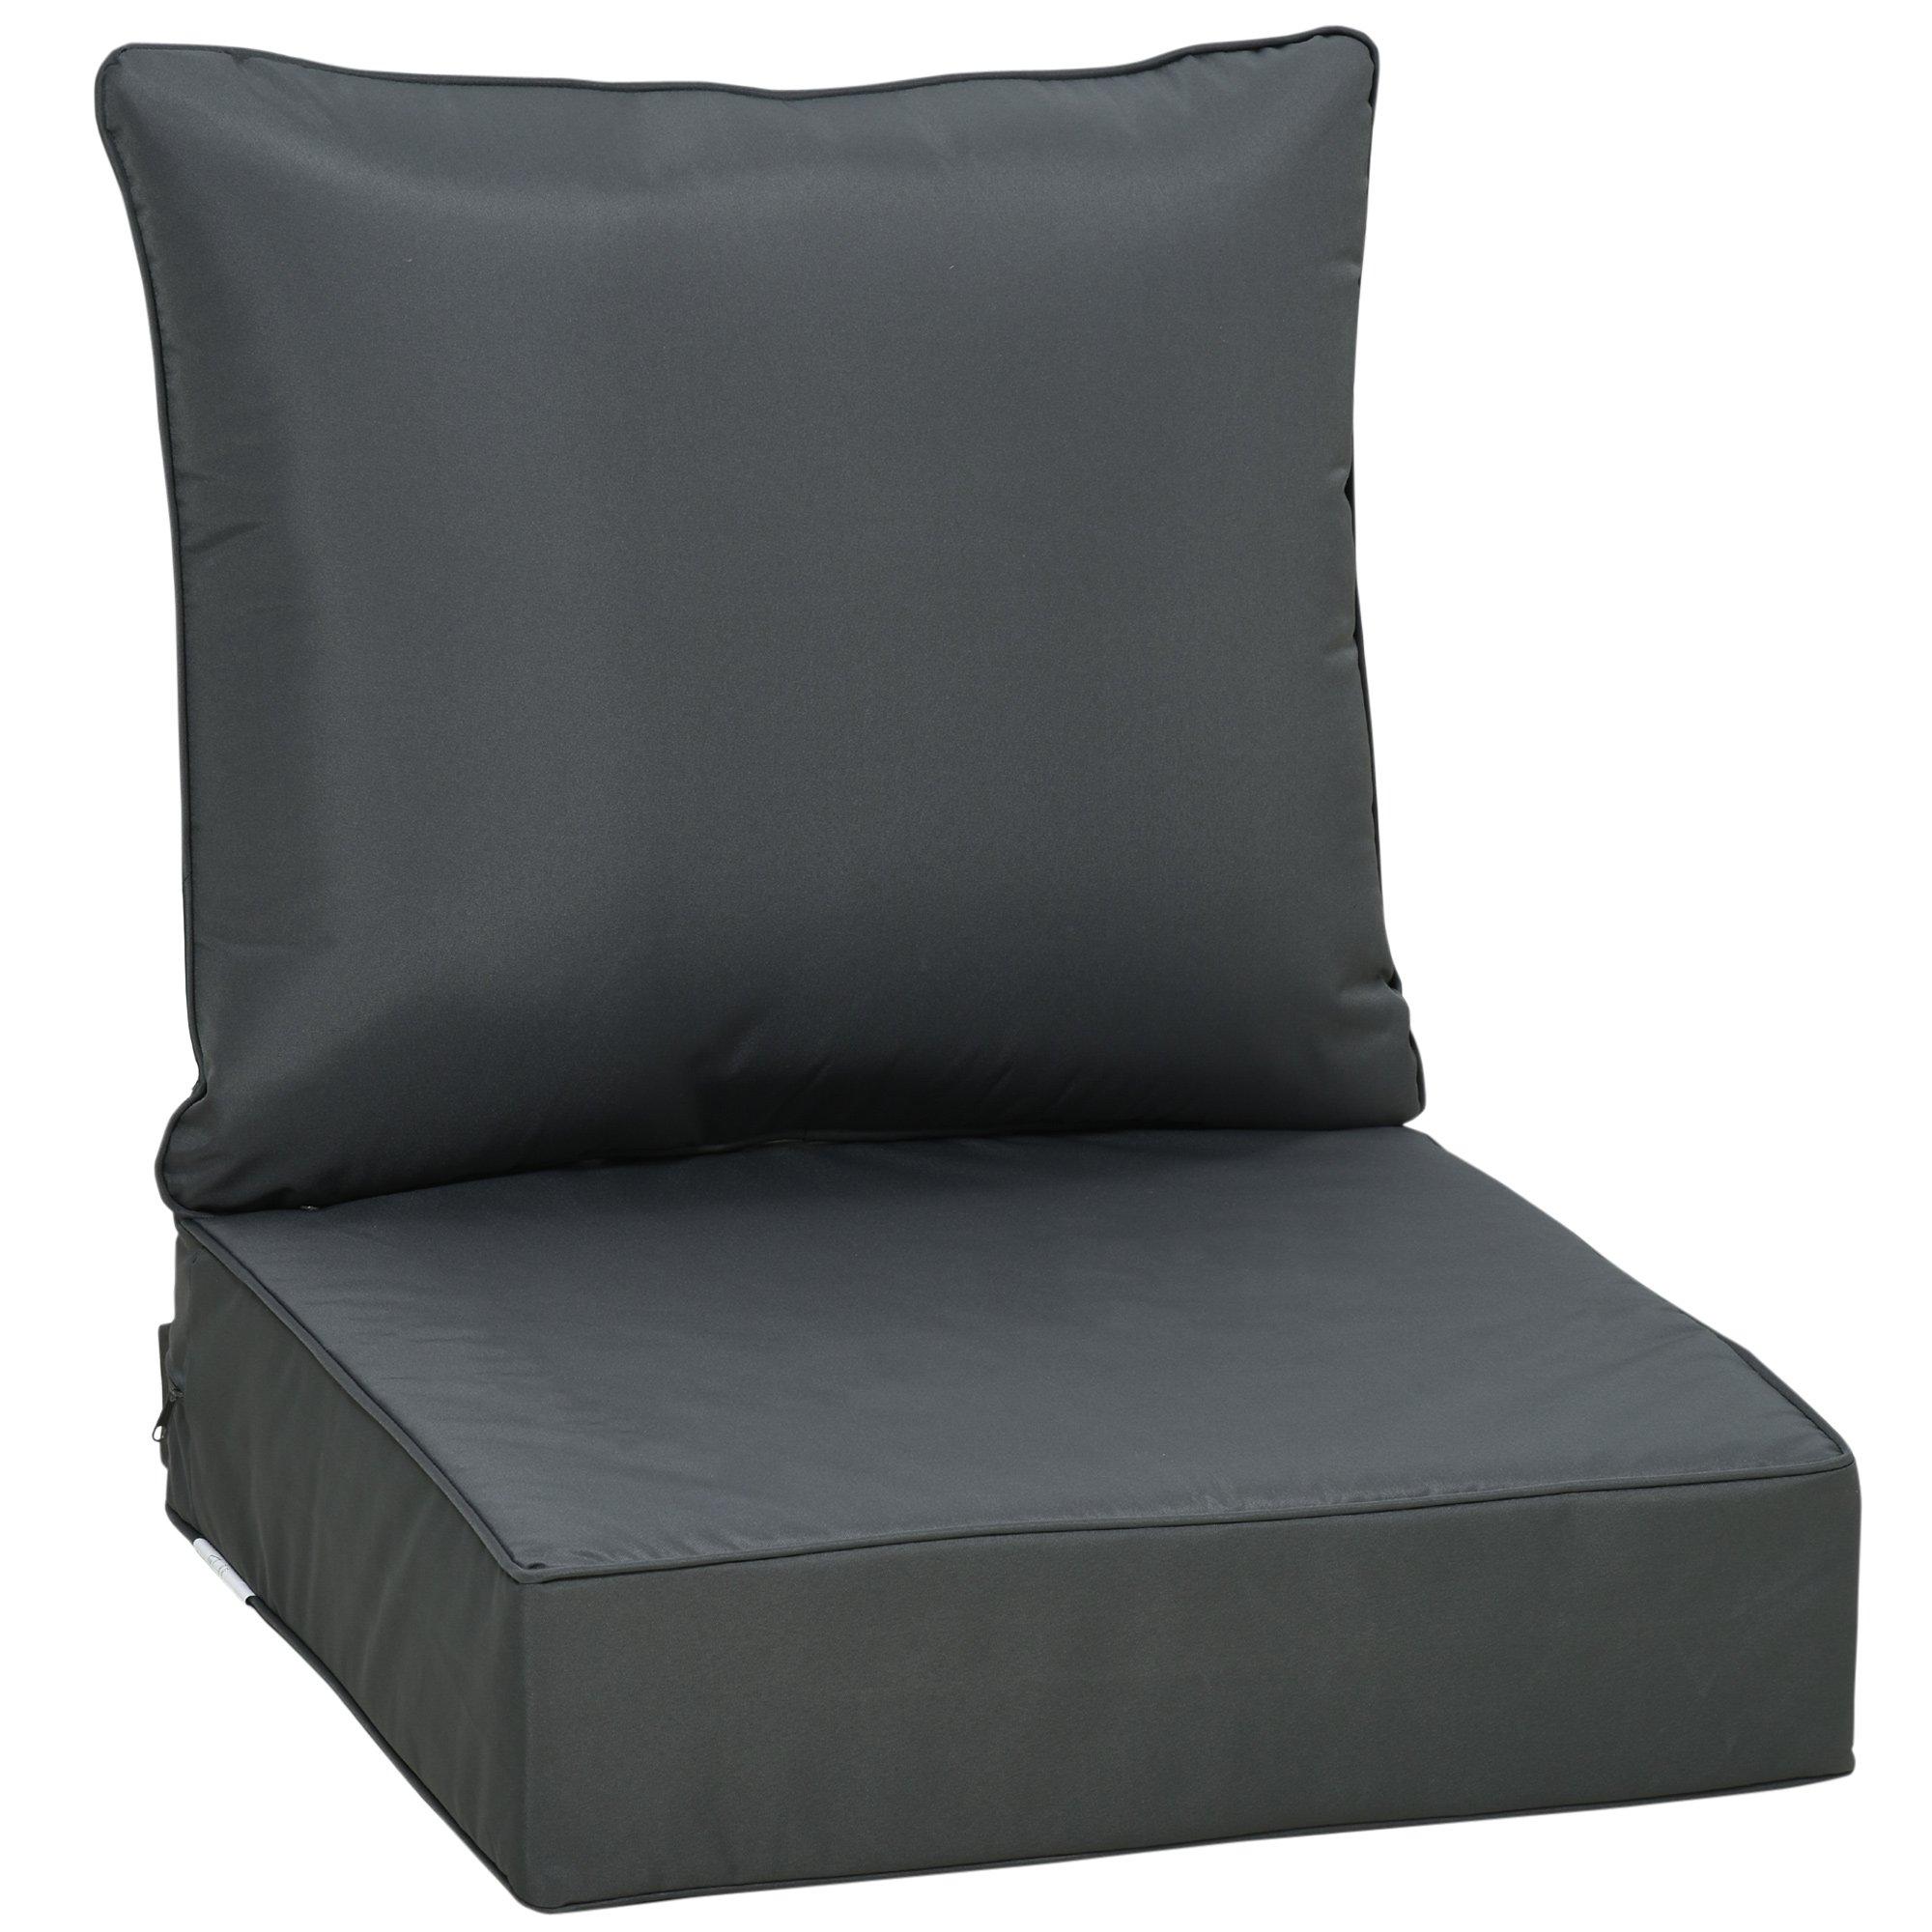 Outdoor Seat and Back Cushion Set, Deep Seating Chair Cushion